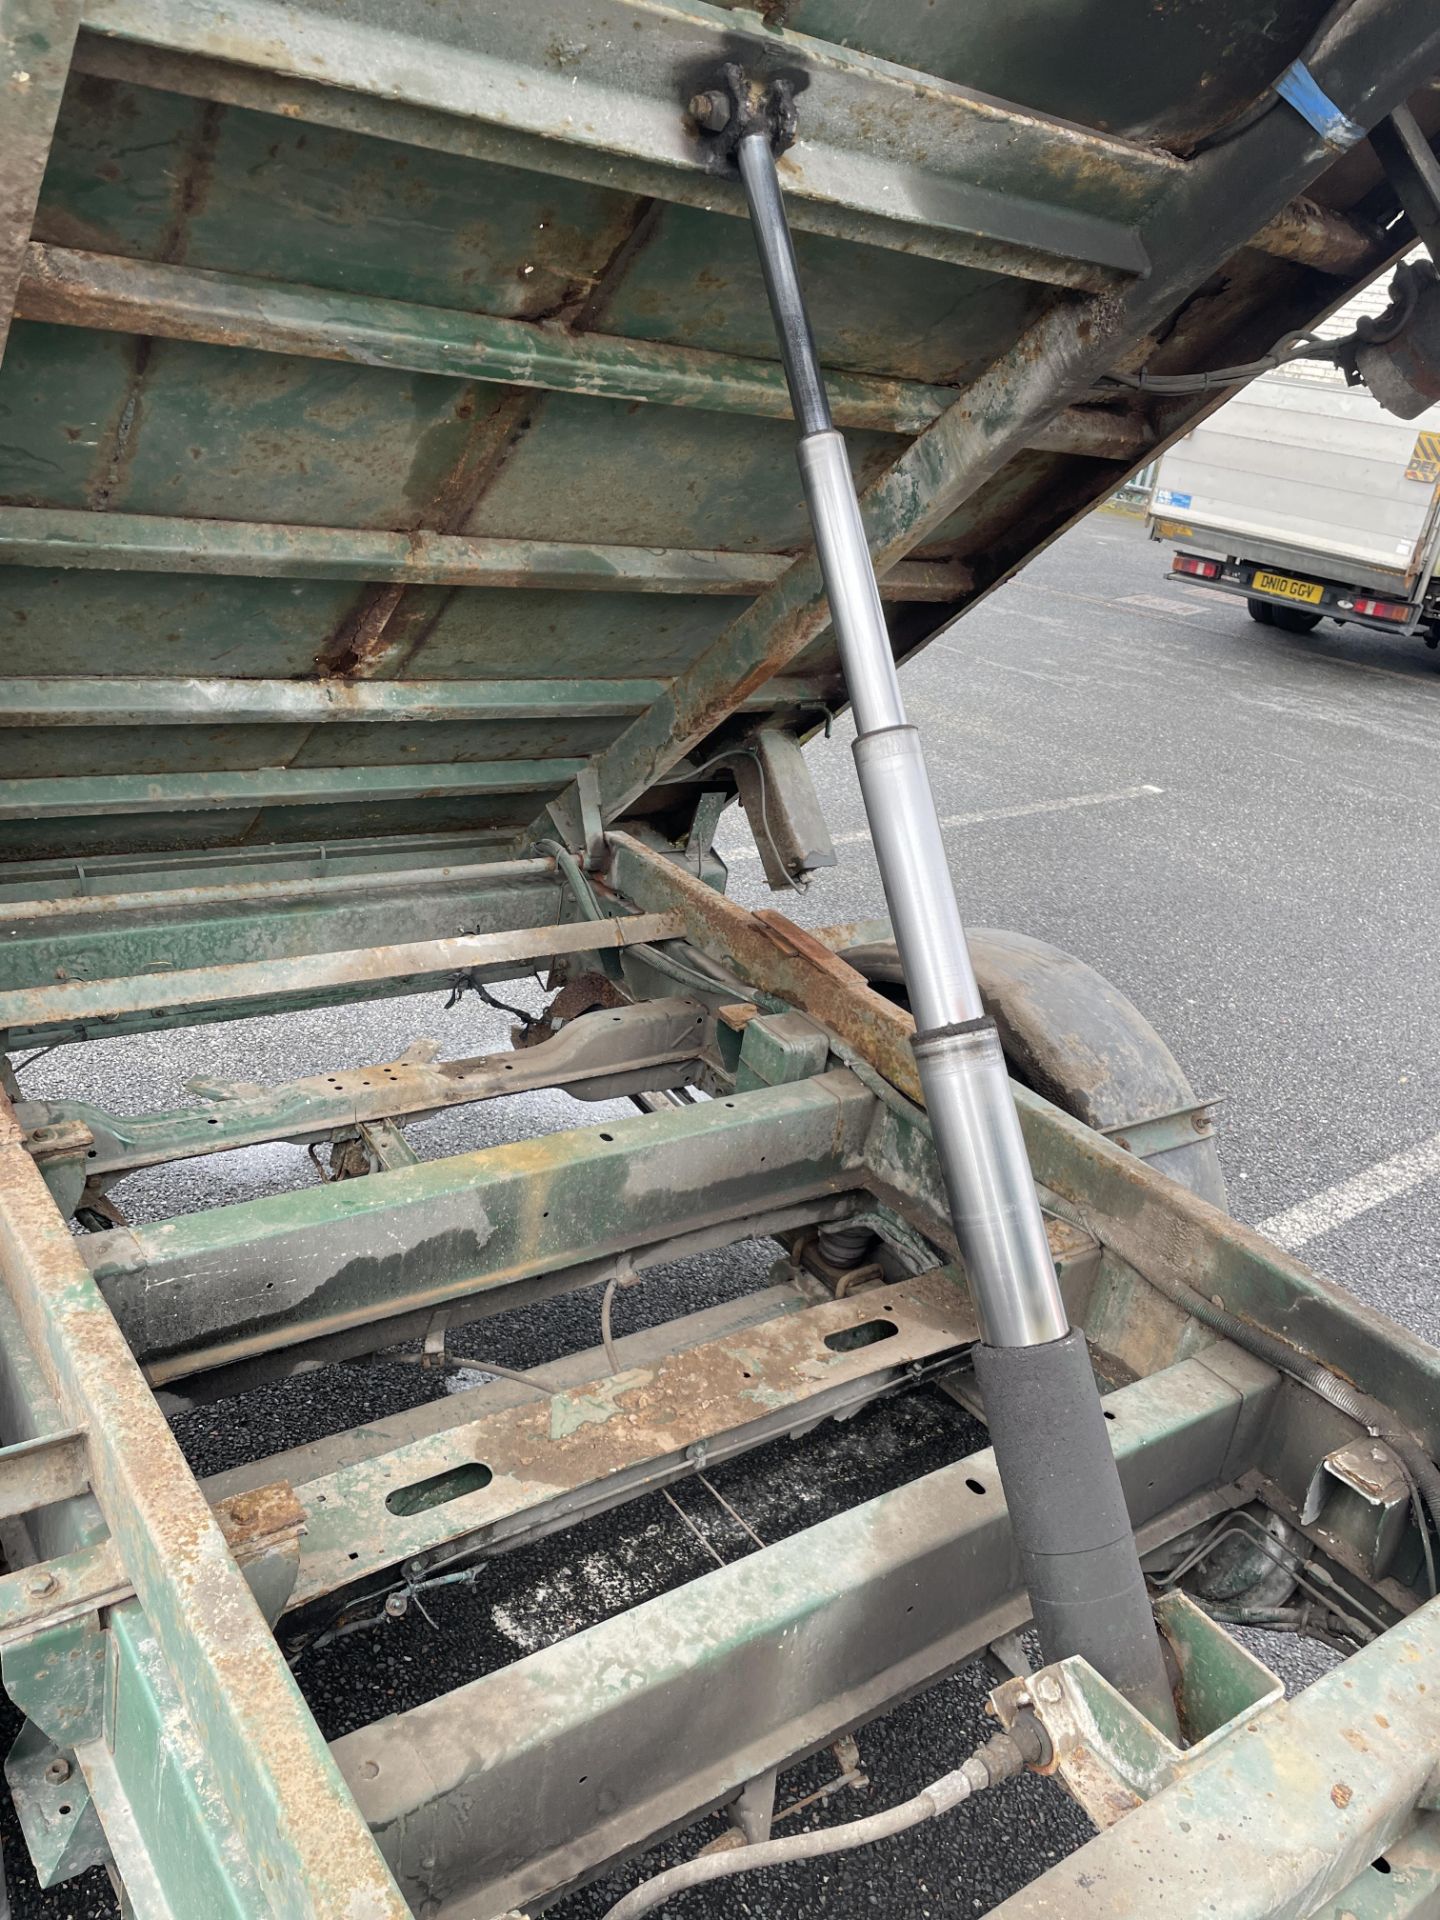 Citroen Relay Caged Tipper with rare Wheelie Bin Lift (39568) - Image 14 of 19